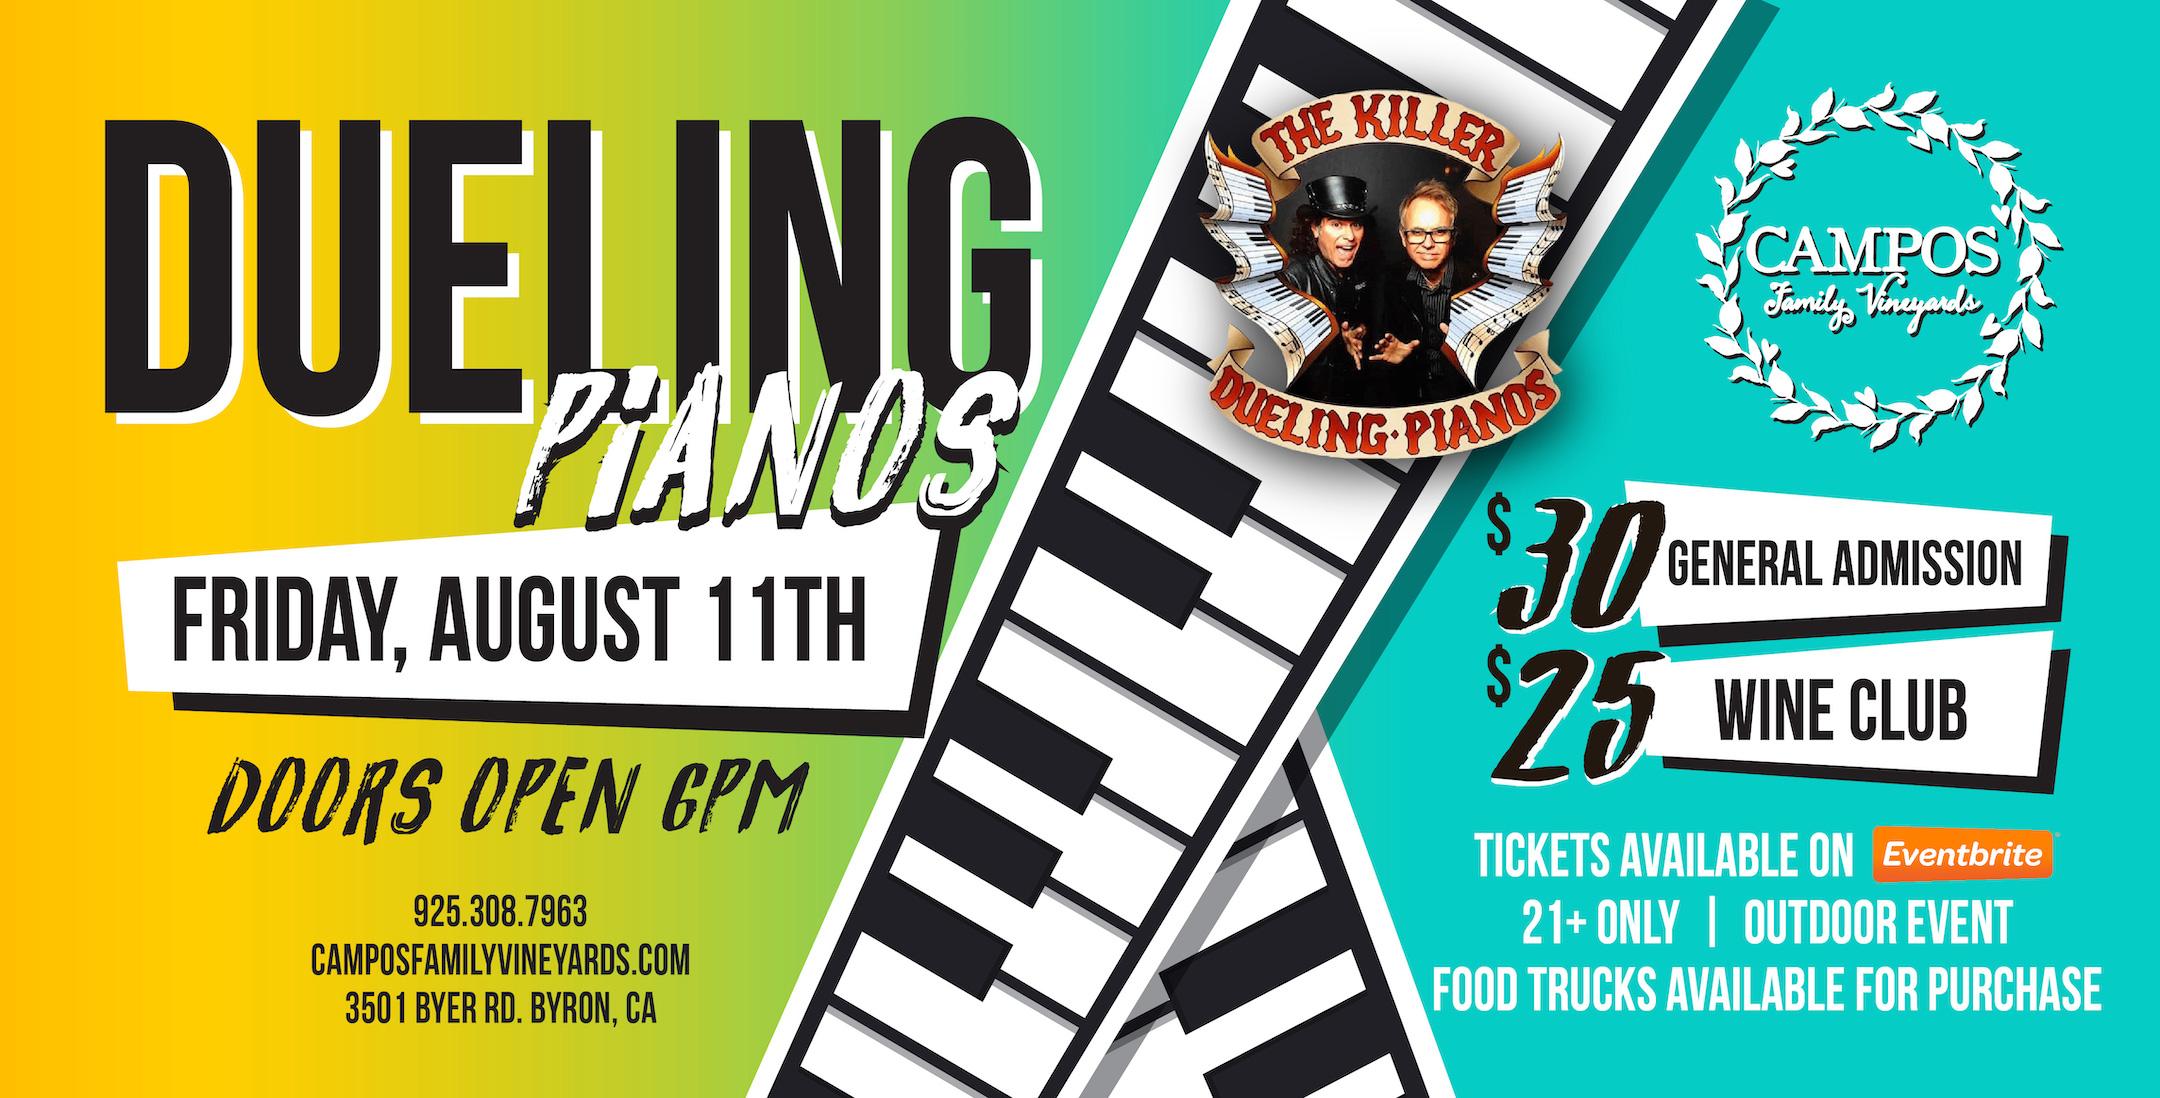 Dueling Pianos with The Killer Dueling Pianos - Outdoor Show